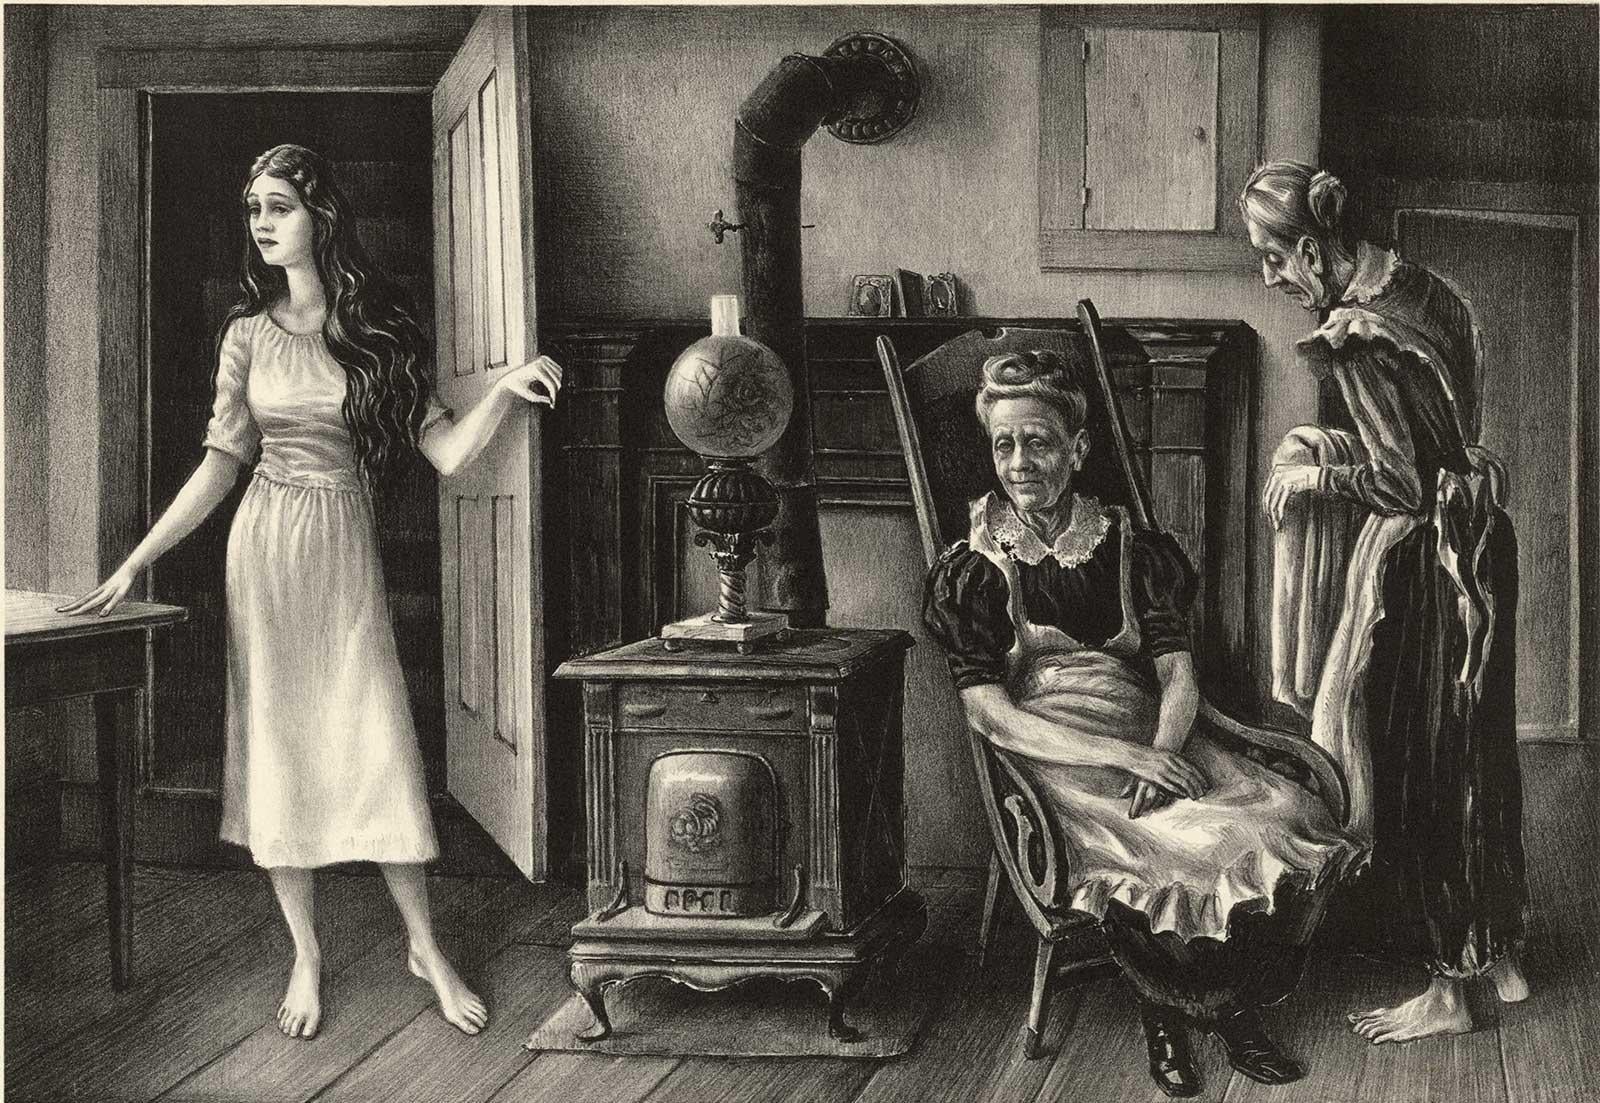 John Stockton De Martelly Interior Print - For the Love of Barbara Allen (Young girl enters room with two women by stove)